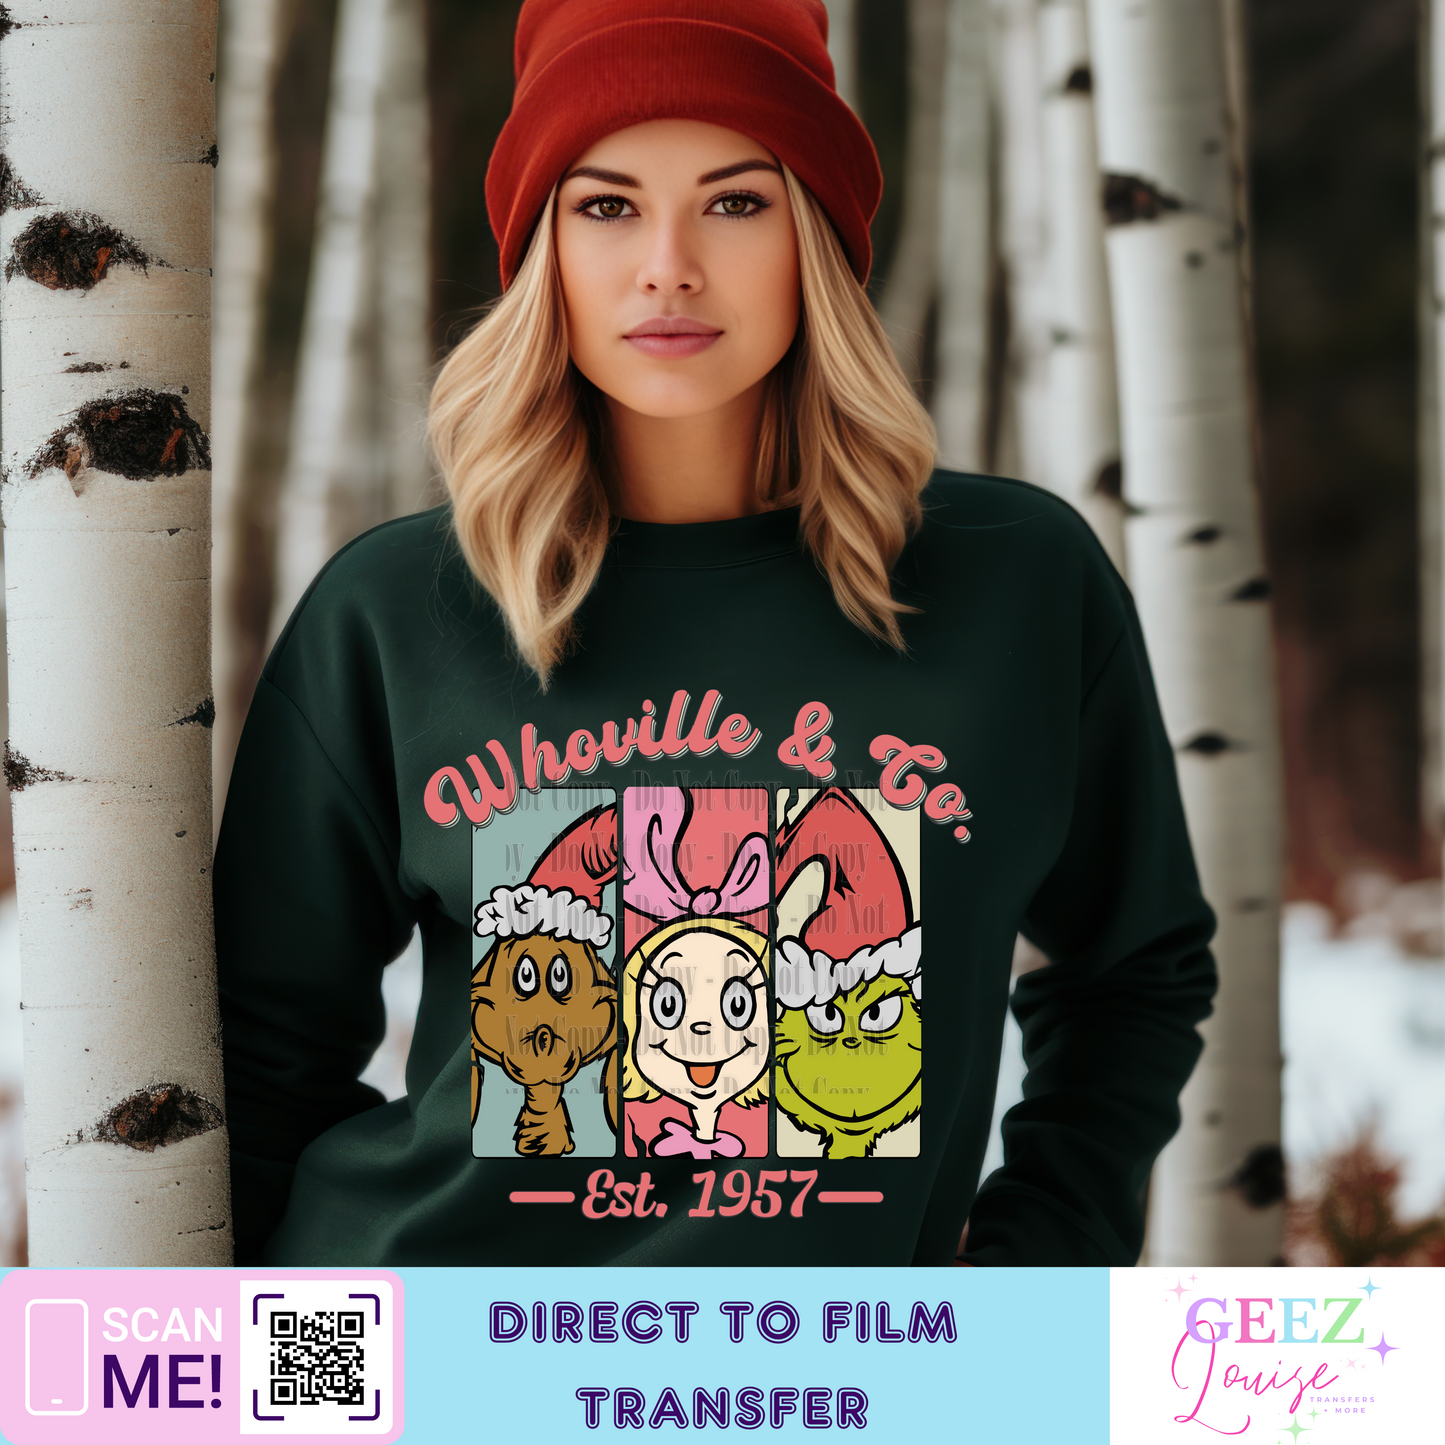 Whoville & co - Direct to Film Transfer - made to order